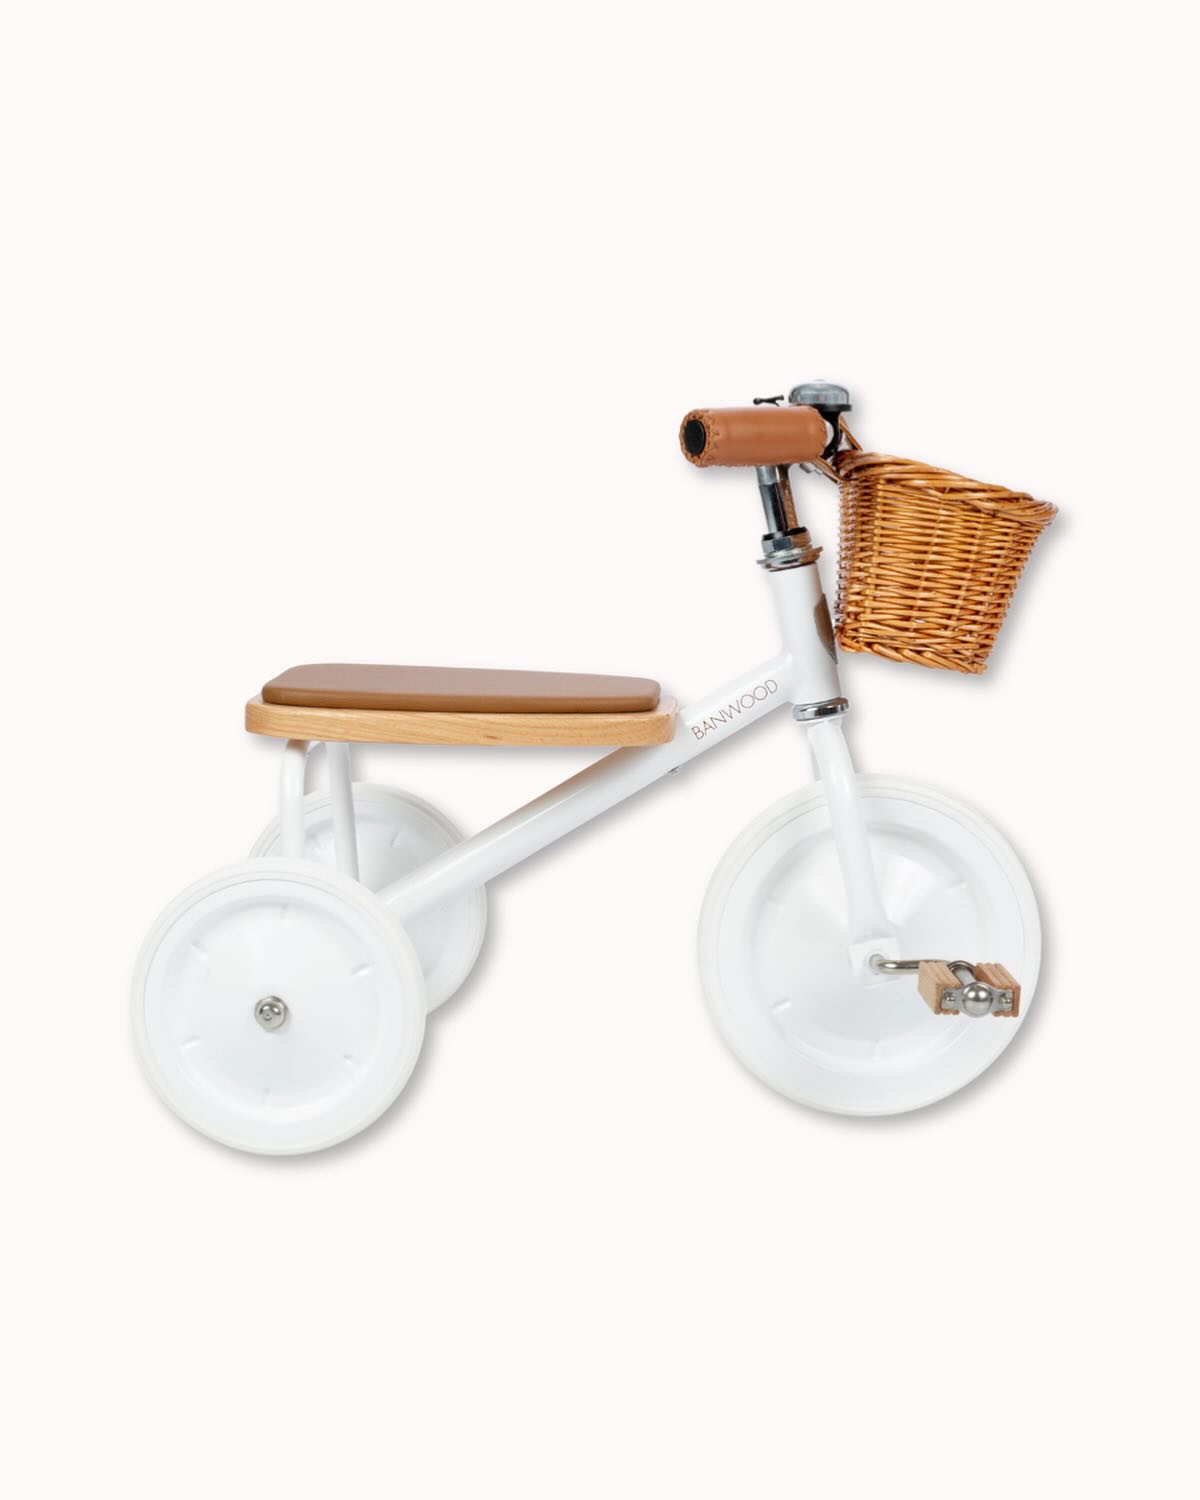 Timeless designed steel frame with retro details such as oak wood pedals and vegan leather grips. Our trike comes in 7 different colours and is suitable for kids 2+ yearsShop now at our website, link is in our bio